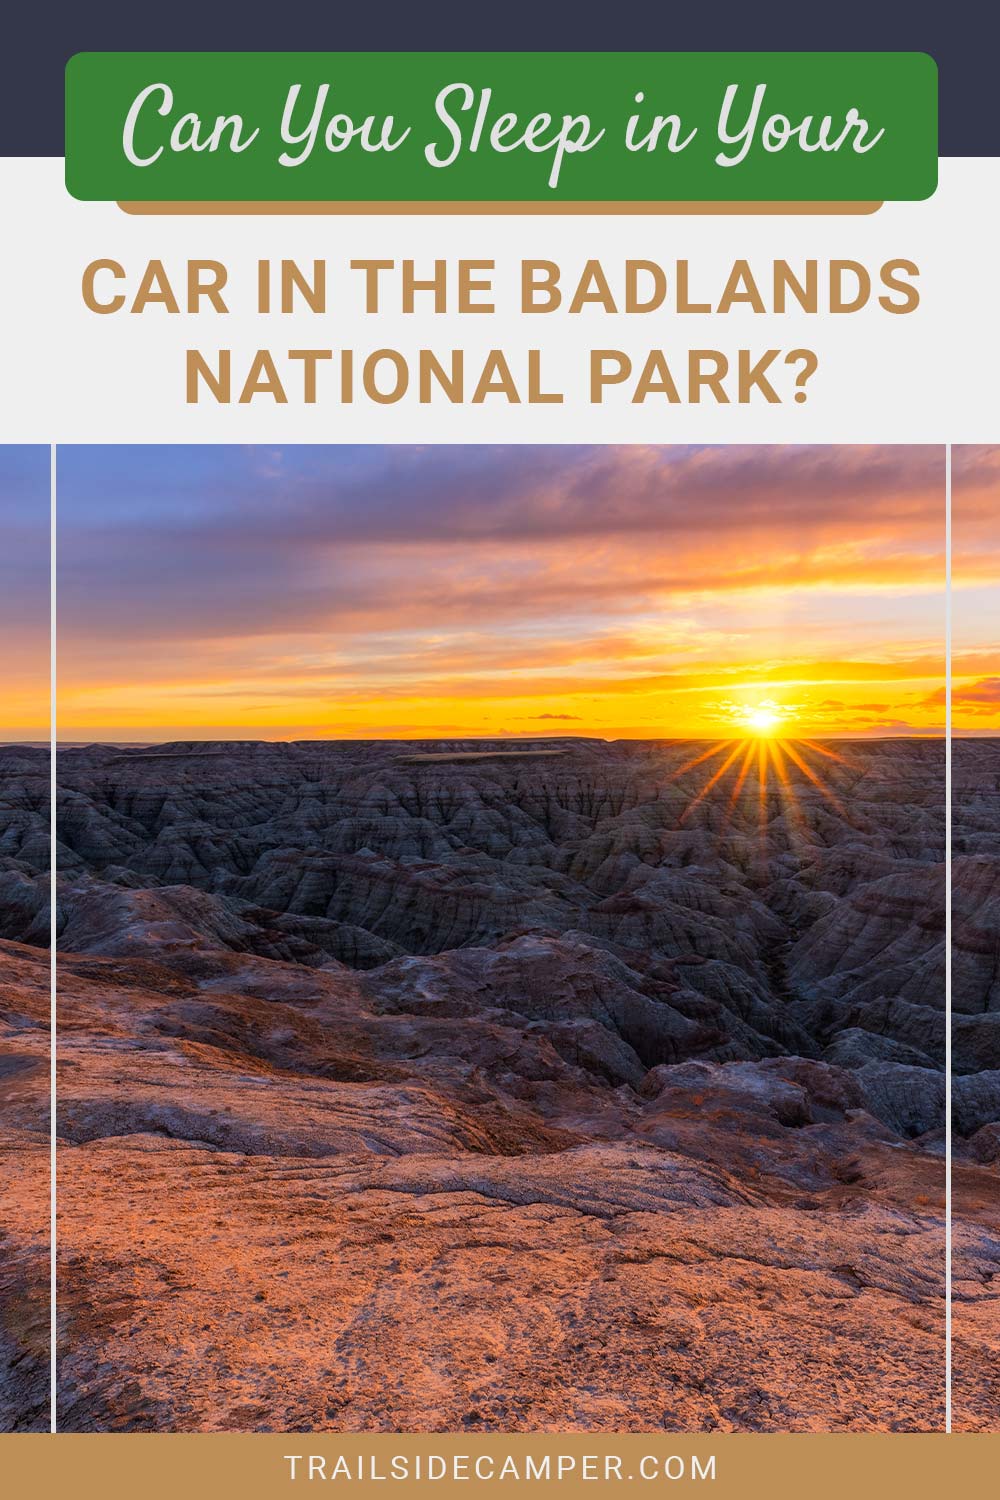 Can You Sleep in Your Car in the Badlands National Park?